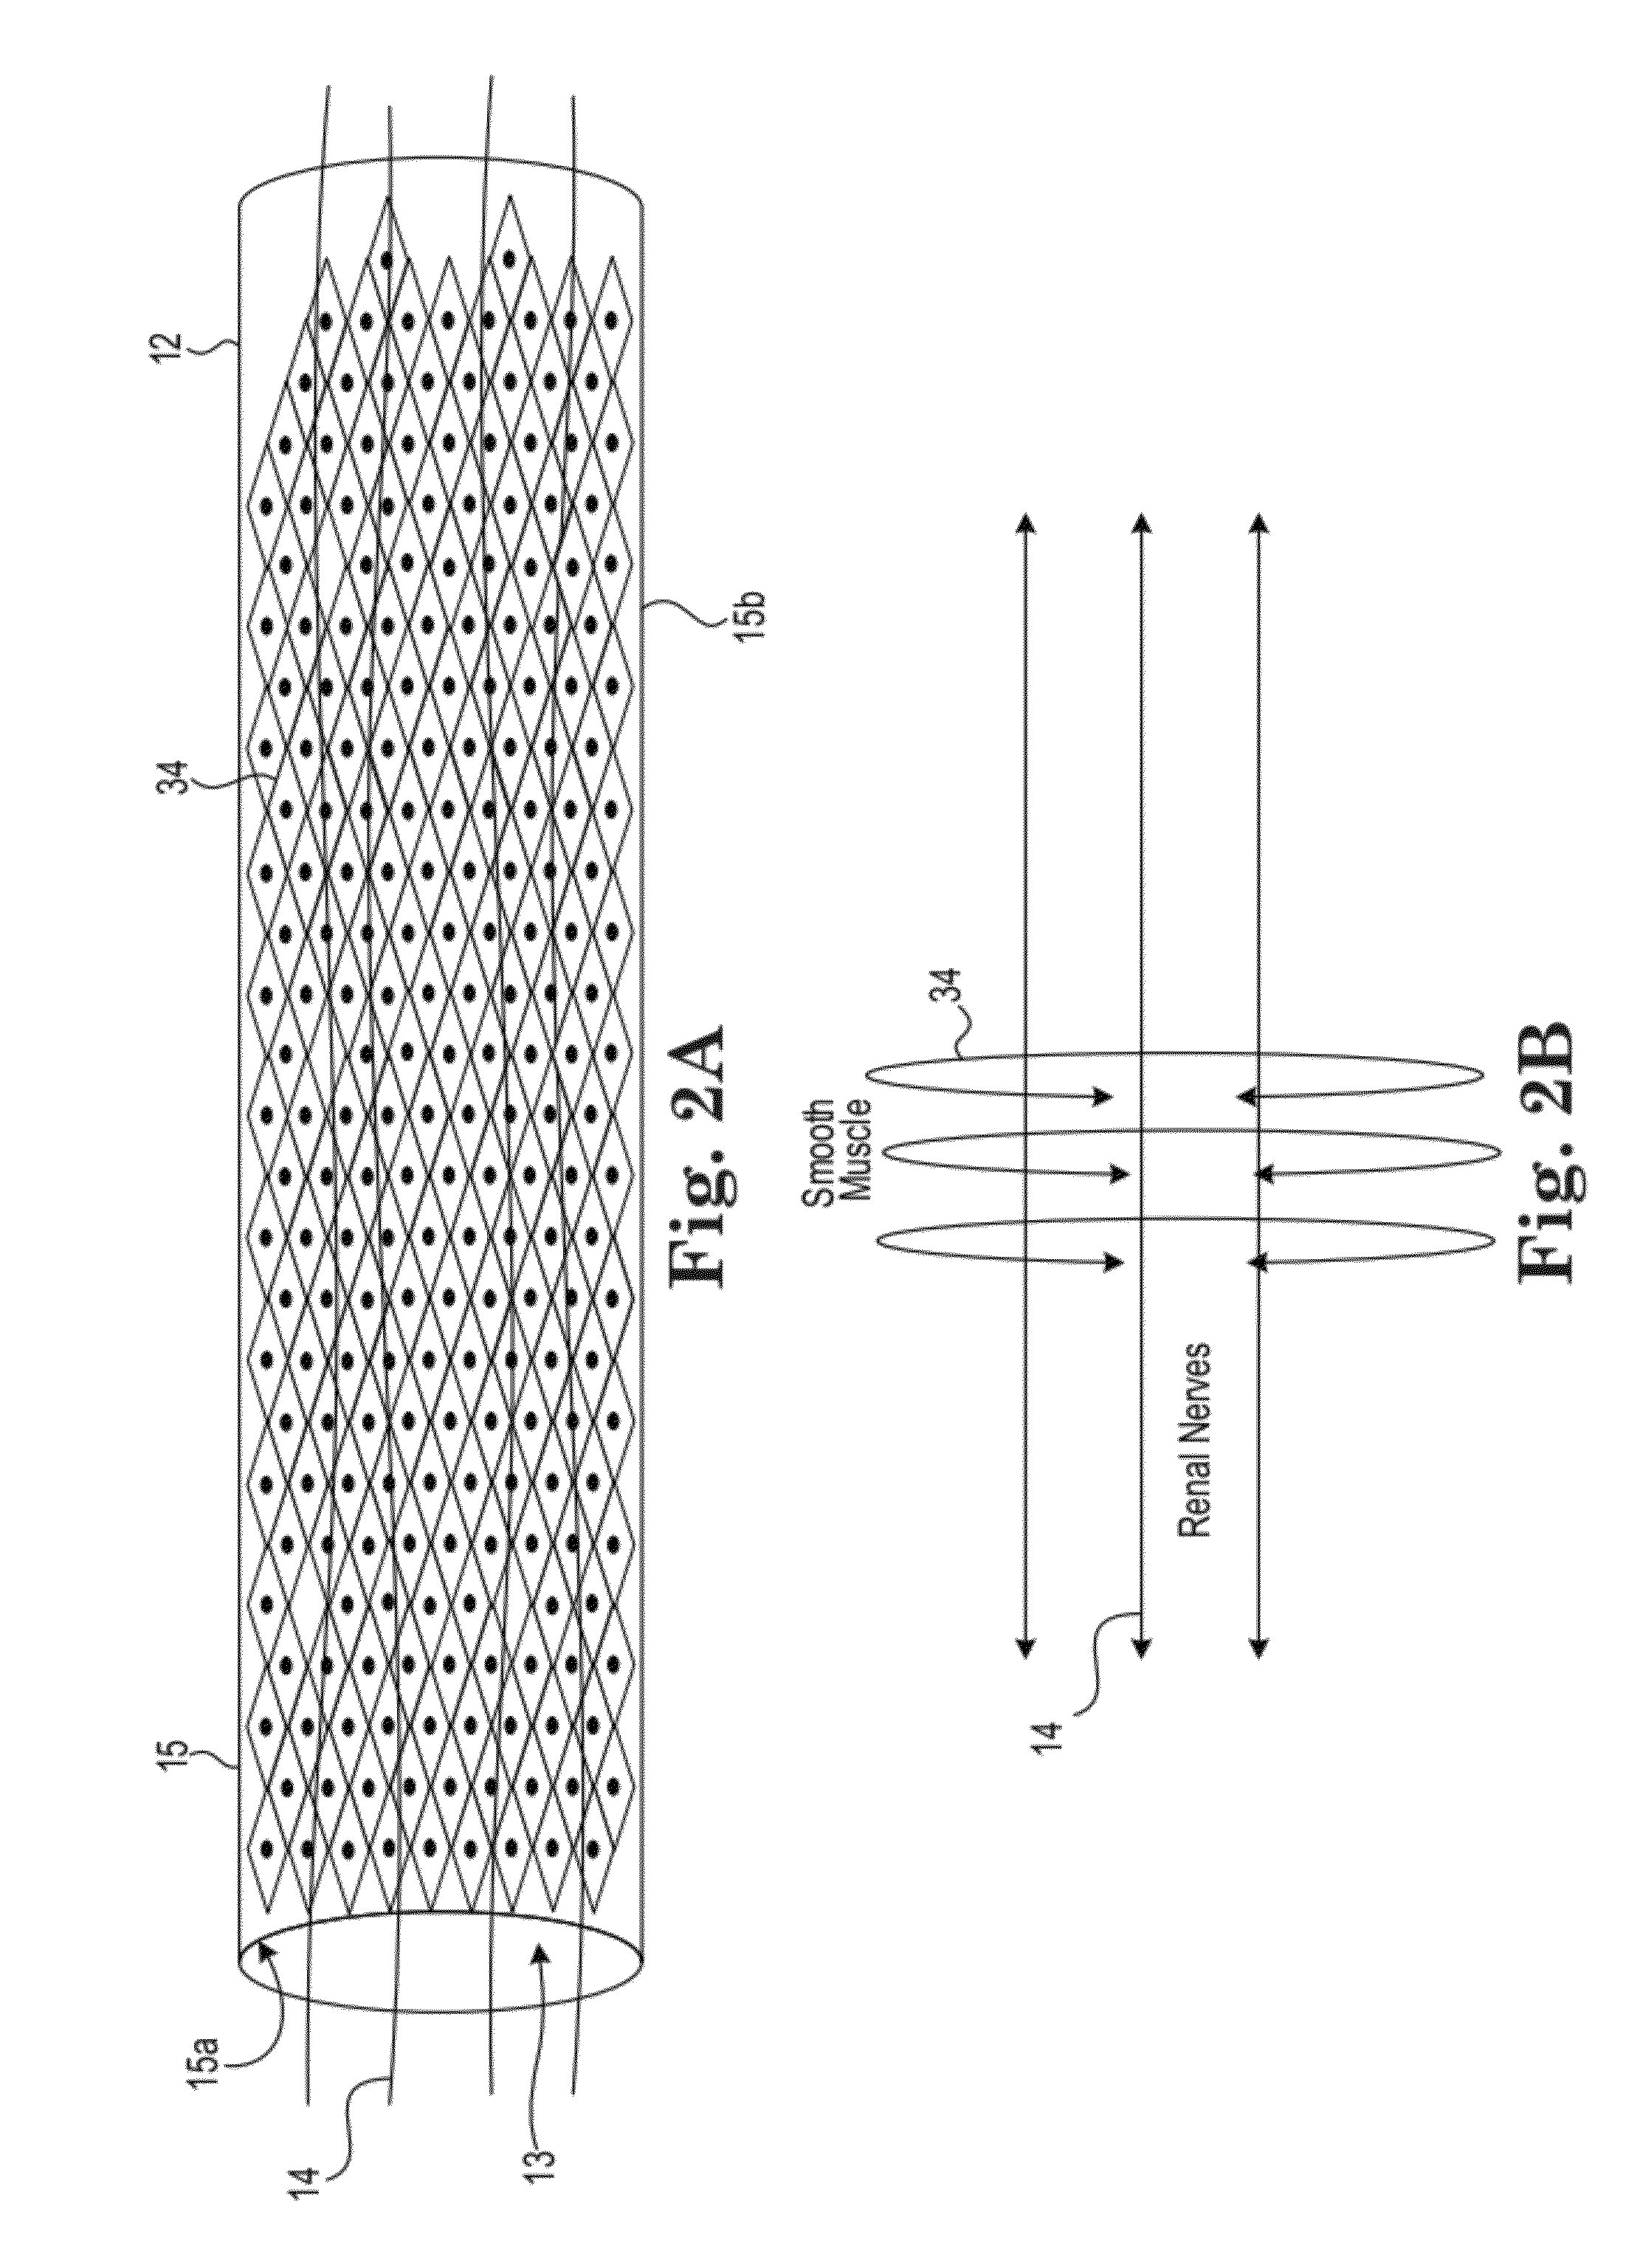 Renal nerve detection and ablation apparatus and method